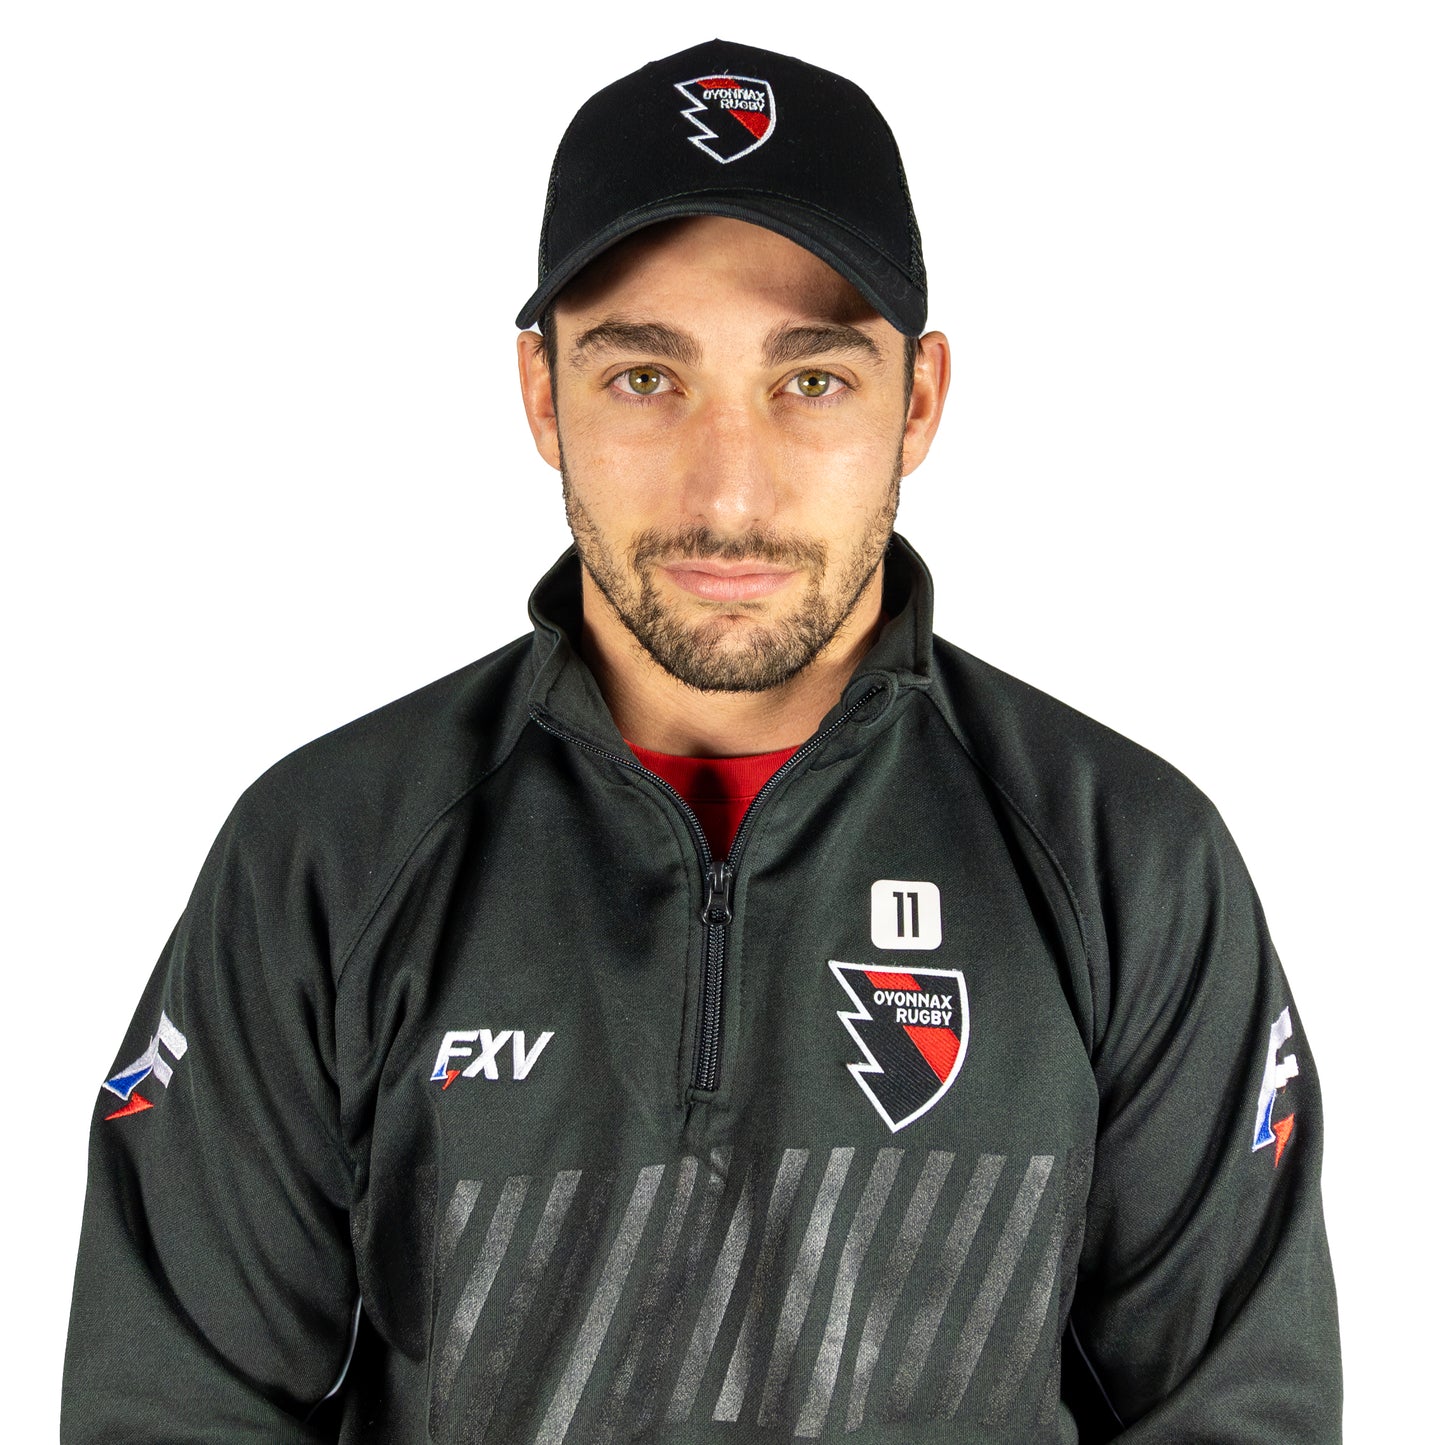 Casquette Mesh Force XV Oyonnax Rugby